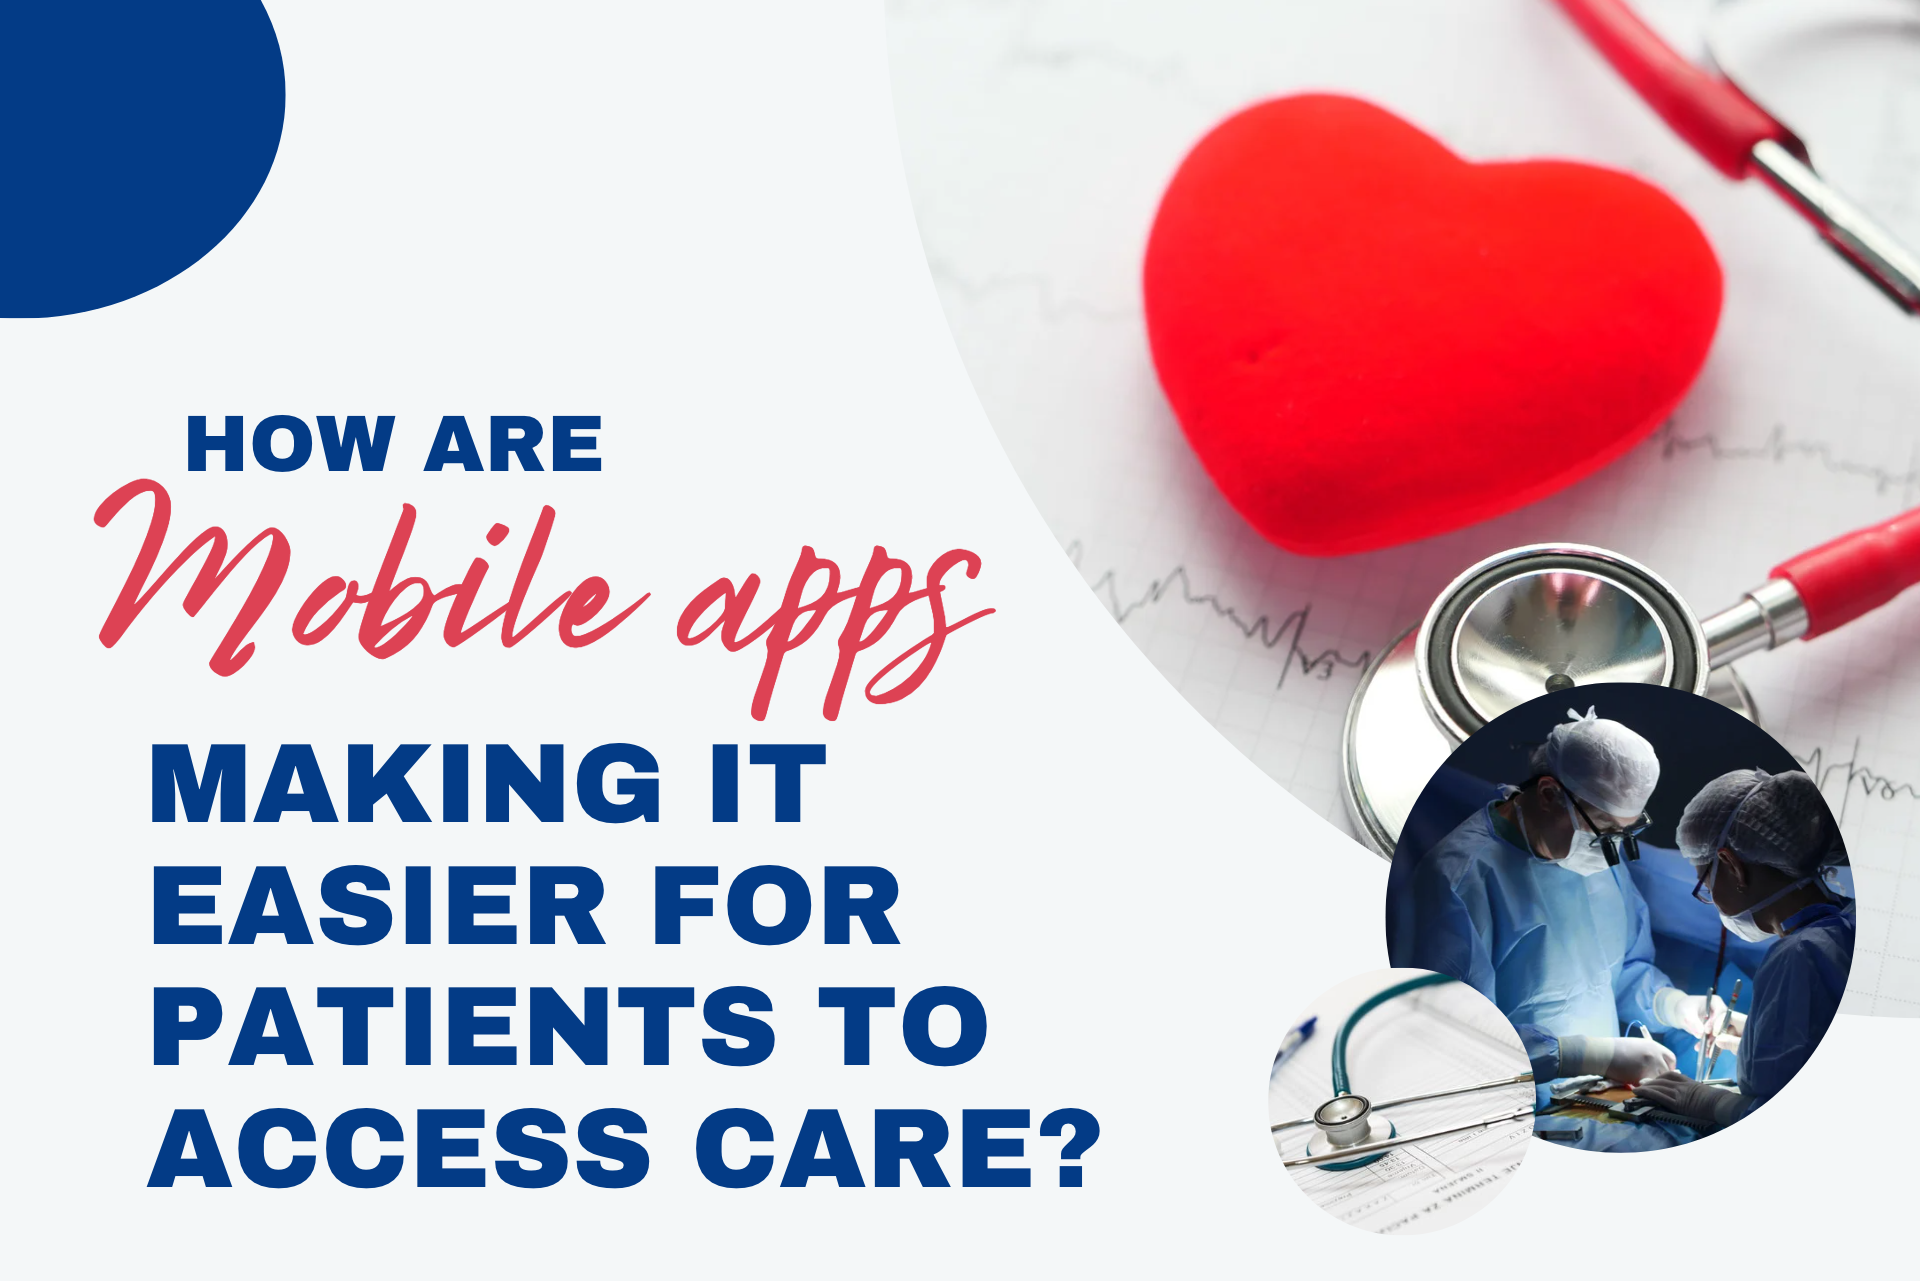 Revolutionizing Healthcare with Mobile Apps